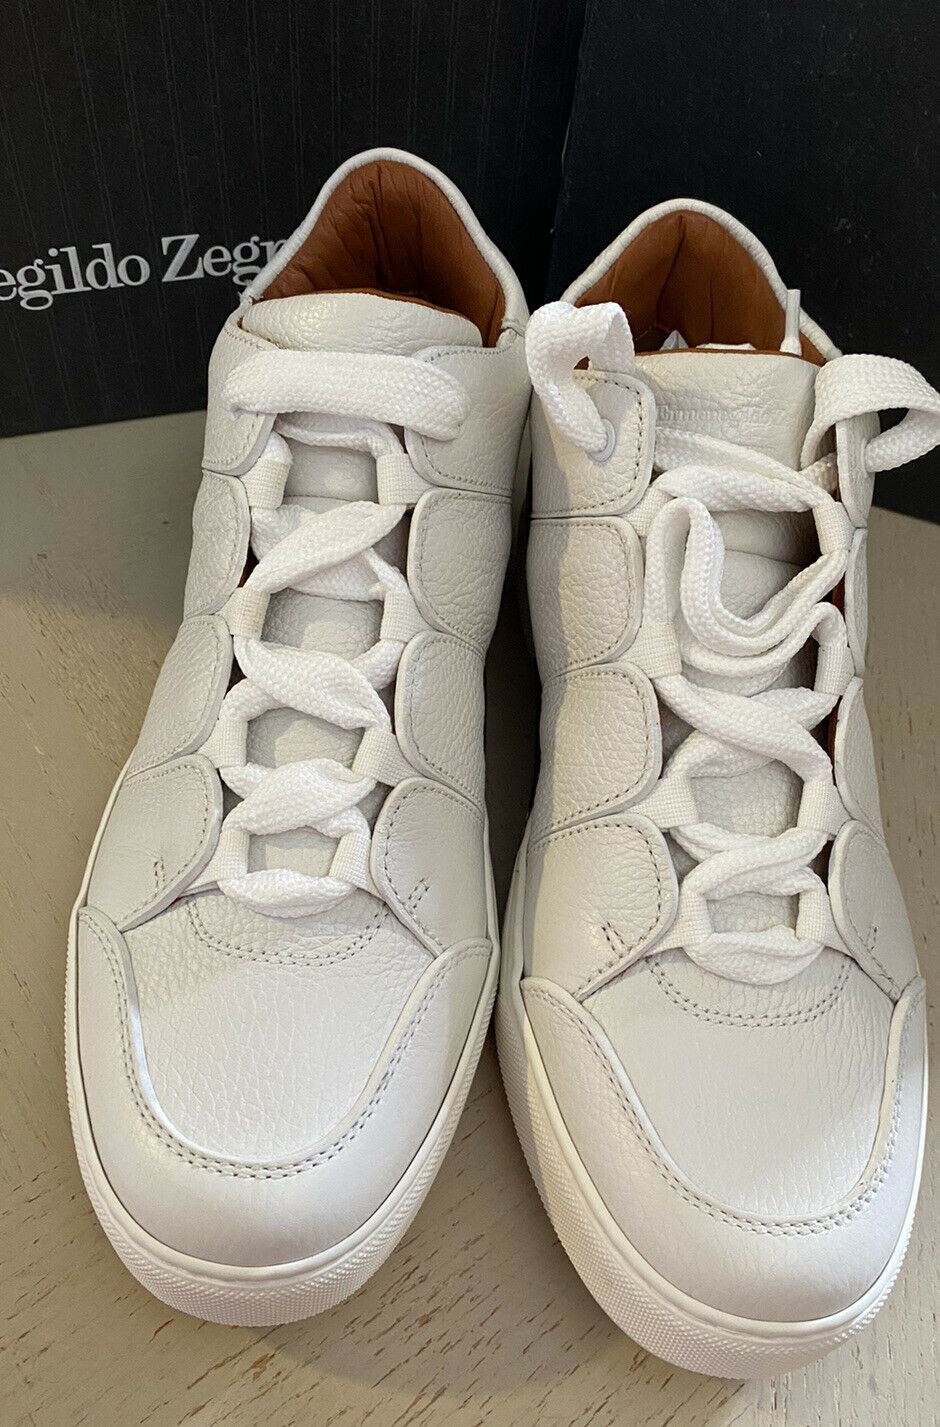 New $895 Ermenegildo Zegna Couture Leather Sneakers Shoes White 10 US Italy